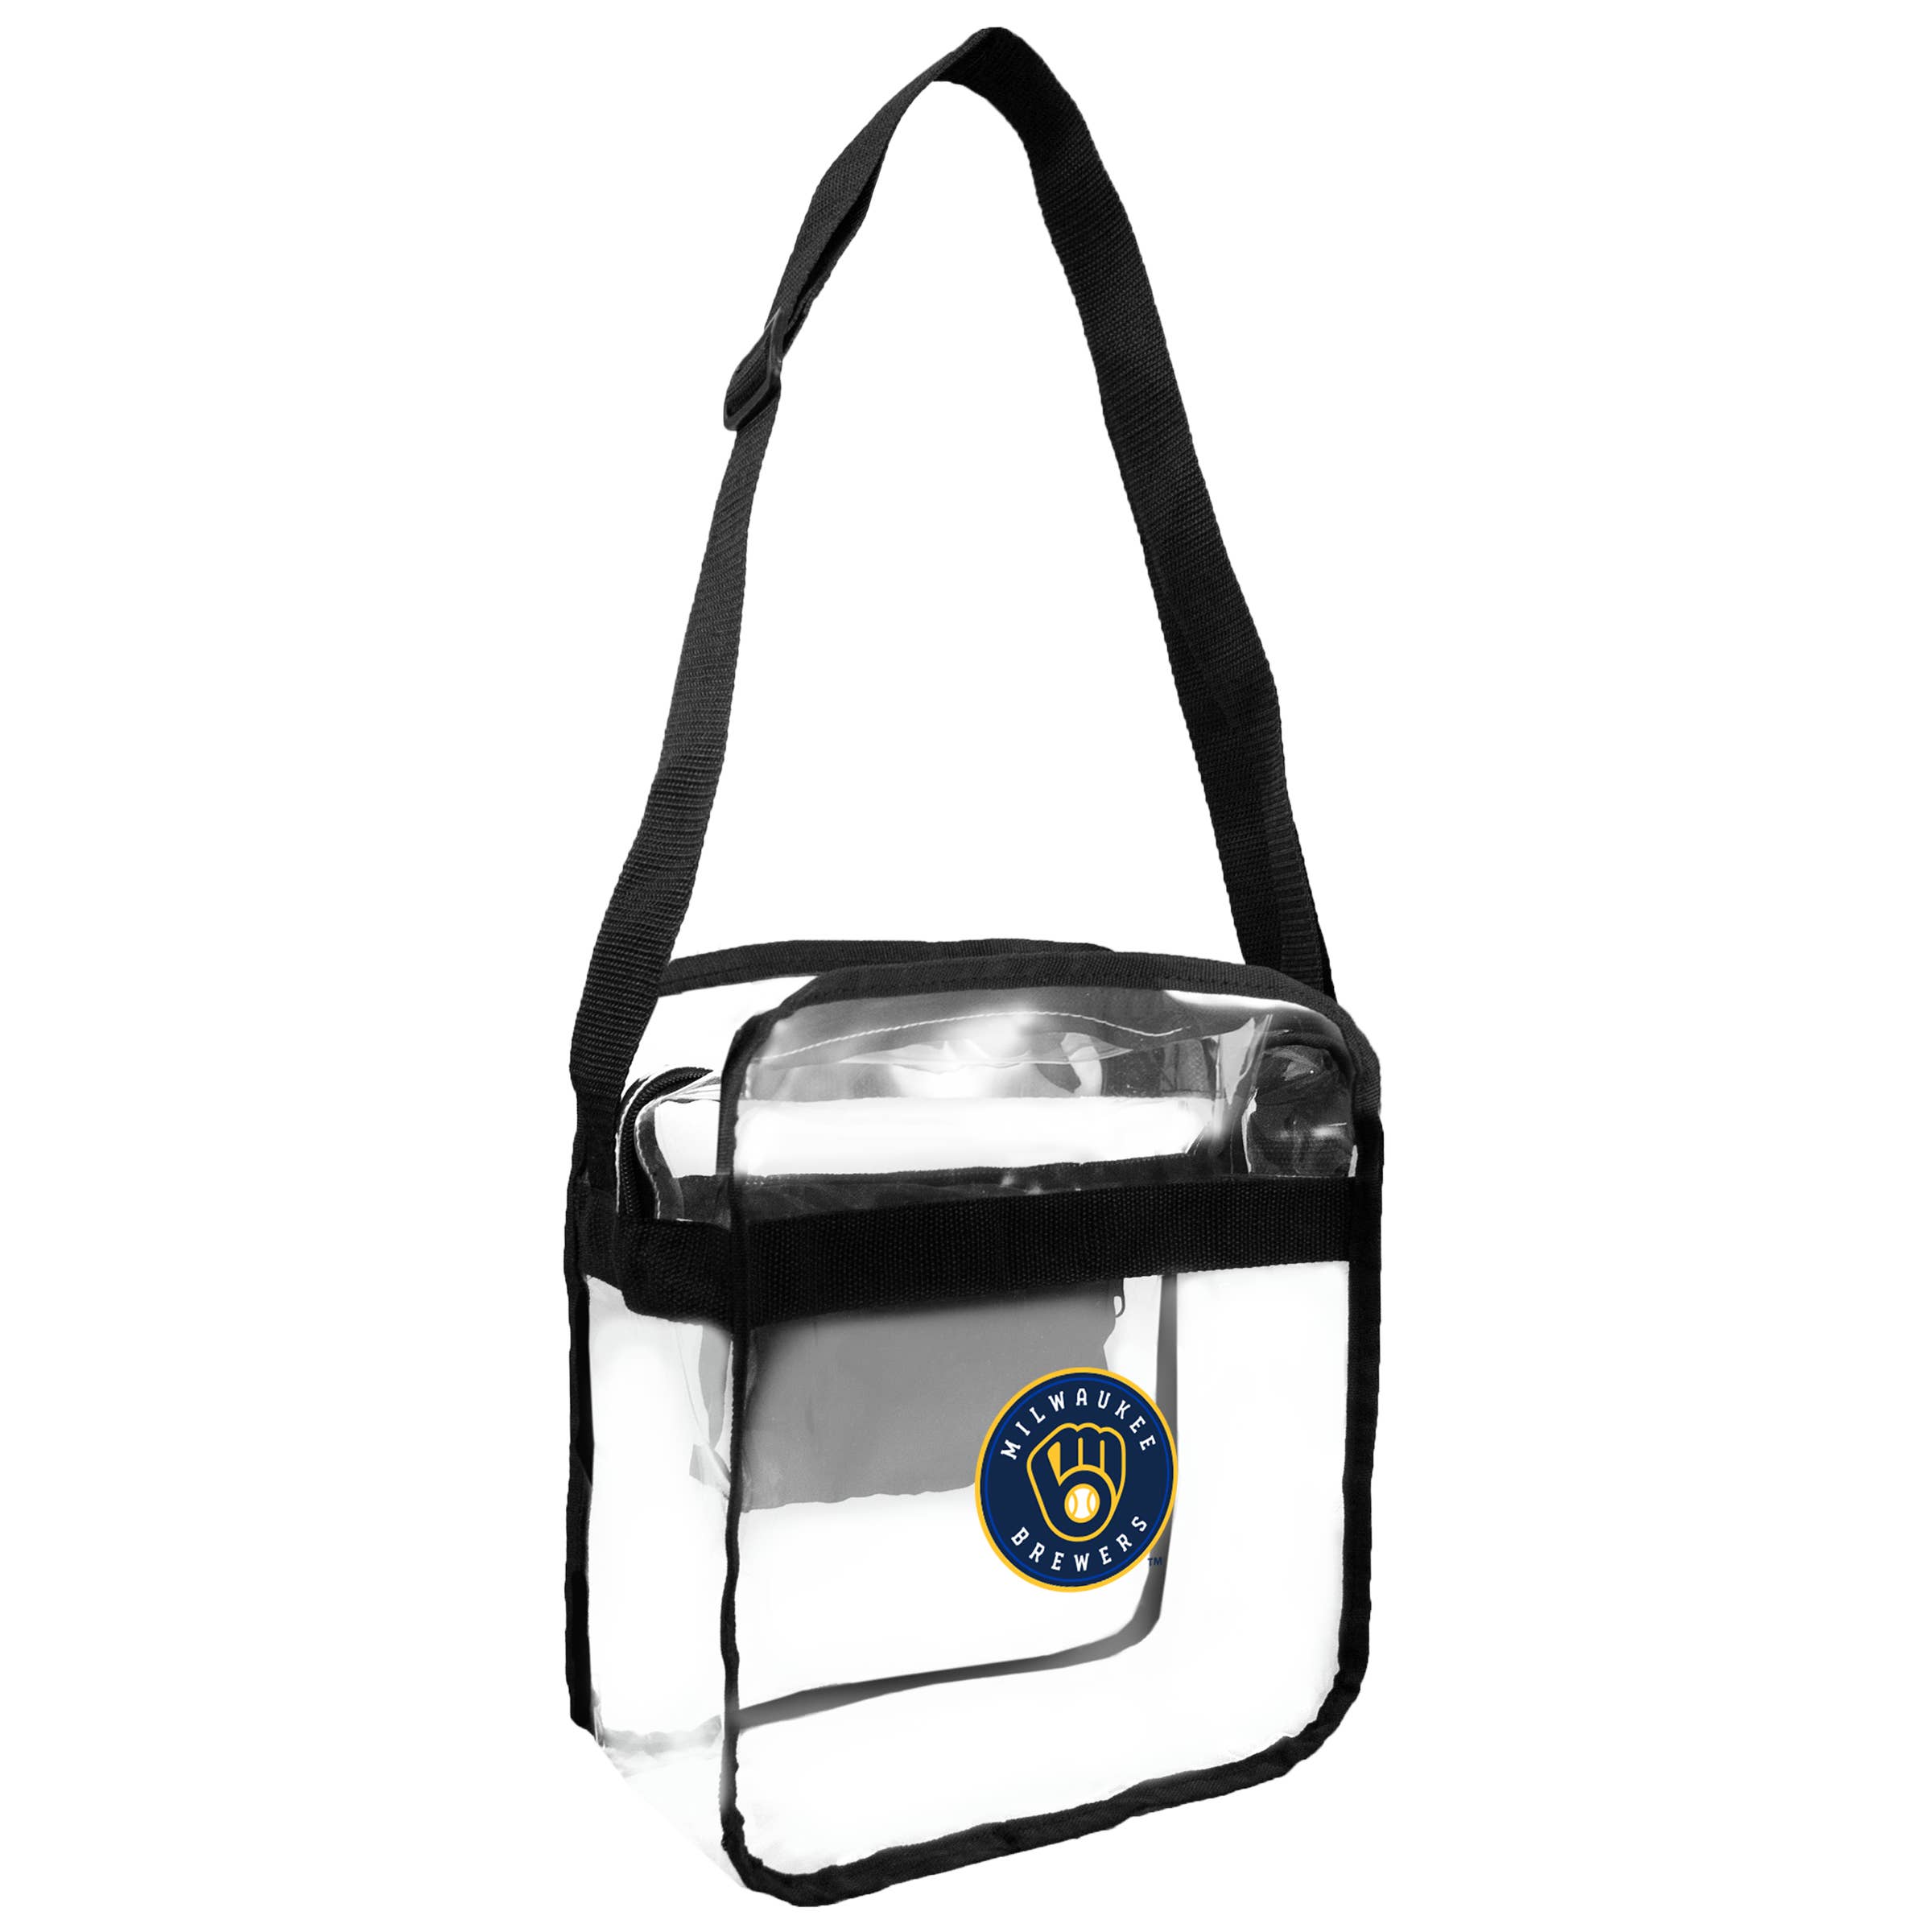 Officially Licensed MLB Pebble Smart Purse - St. Louis Cardinals